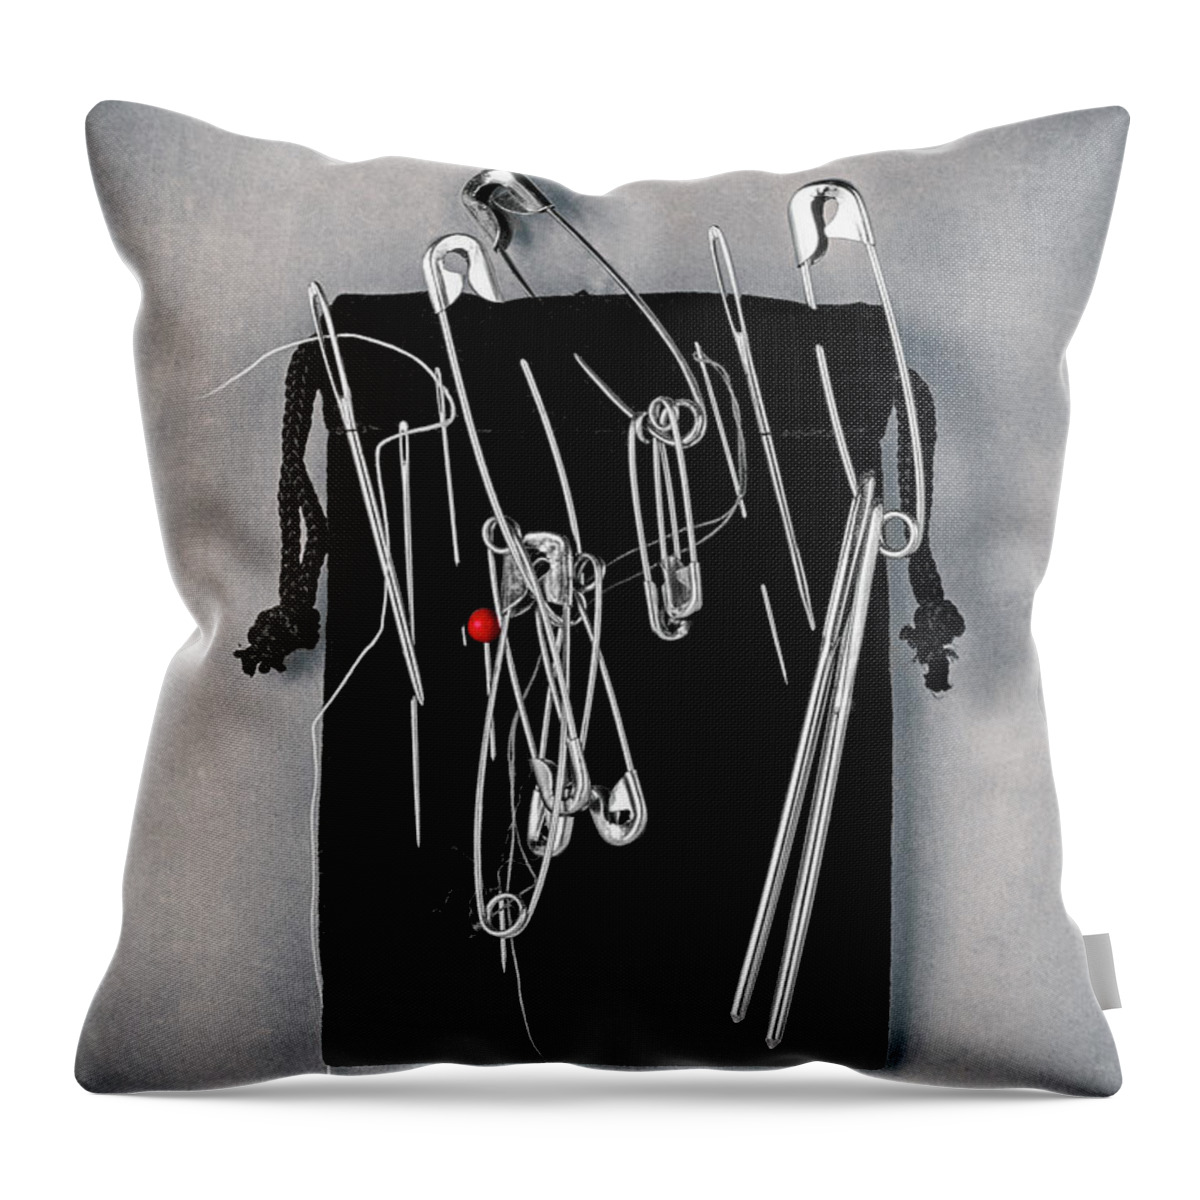 B&w Throw Pillow featuring the photograph On Pins and Needles by Tom Mc Nemar